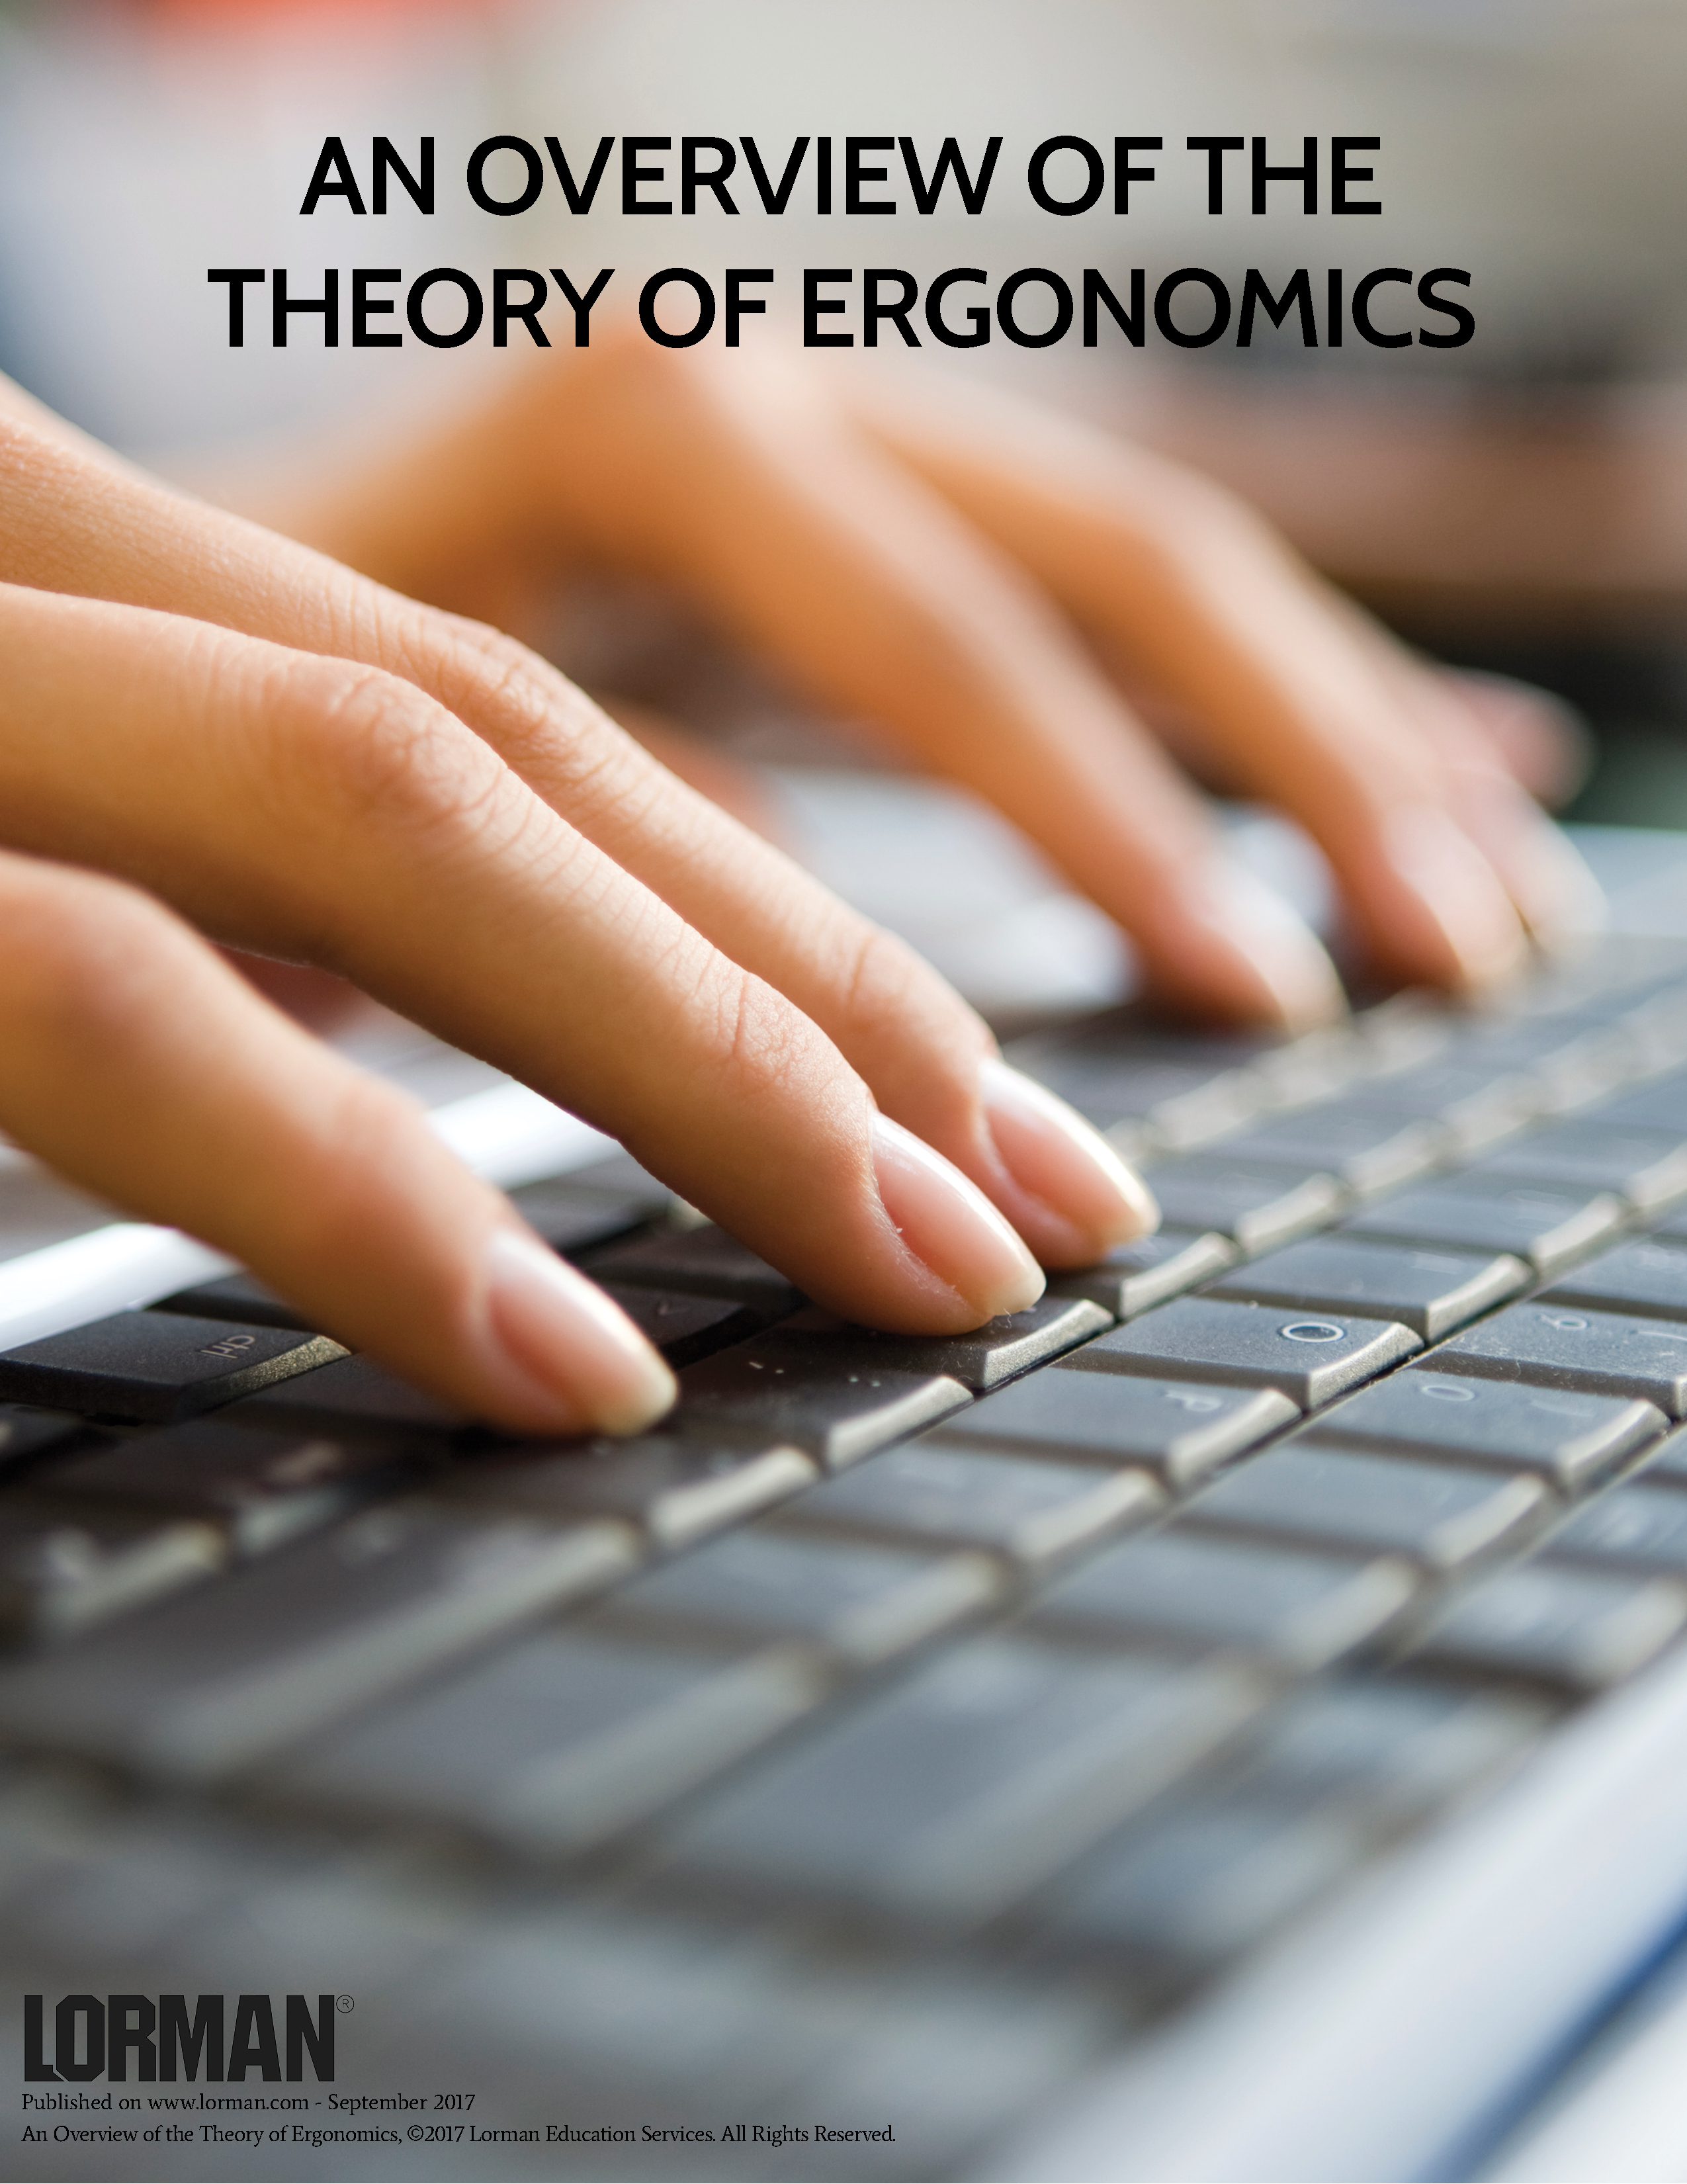 An Overview of the Theory of Ergonomics